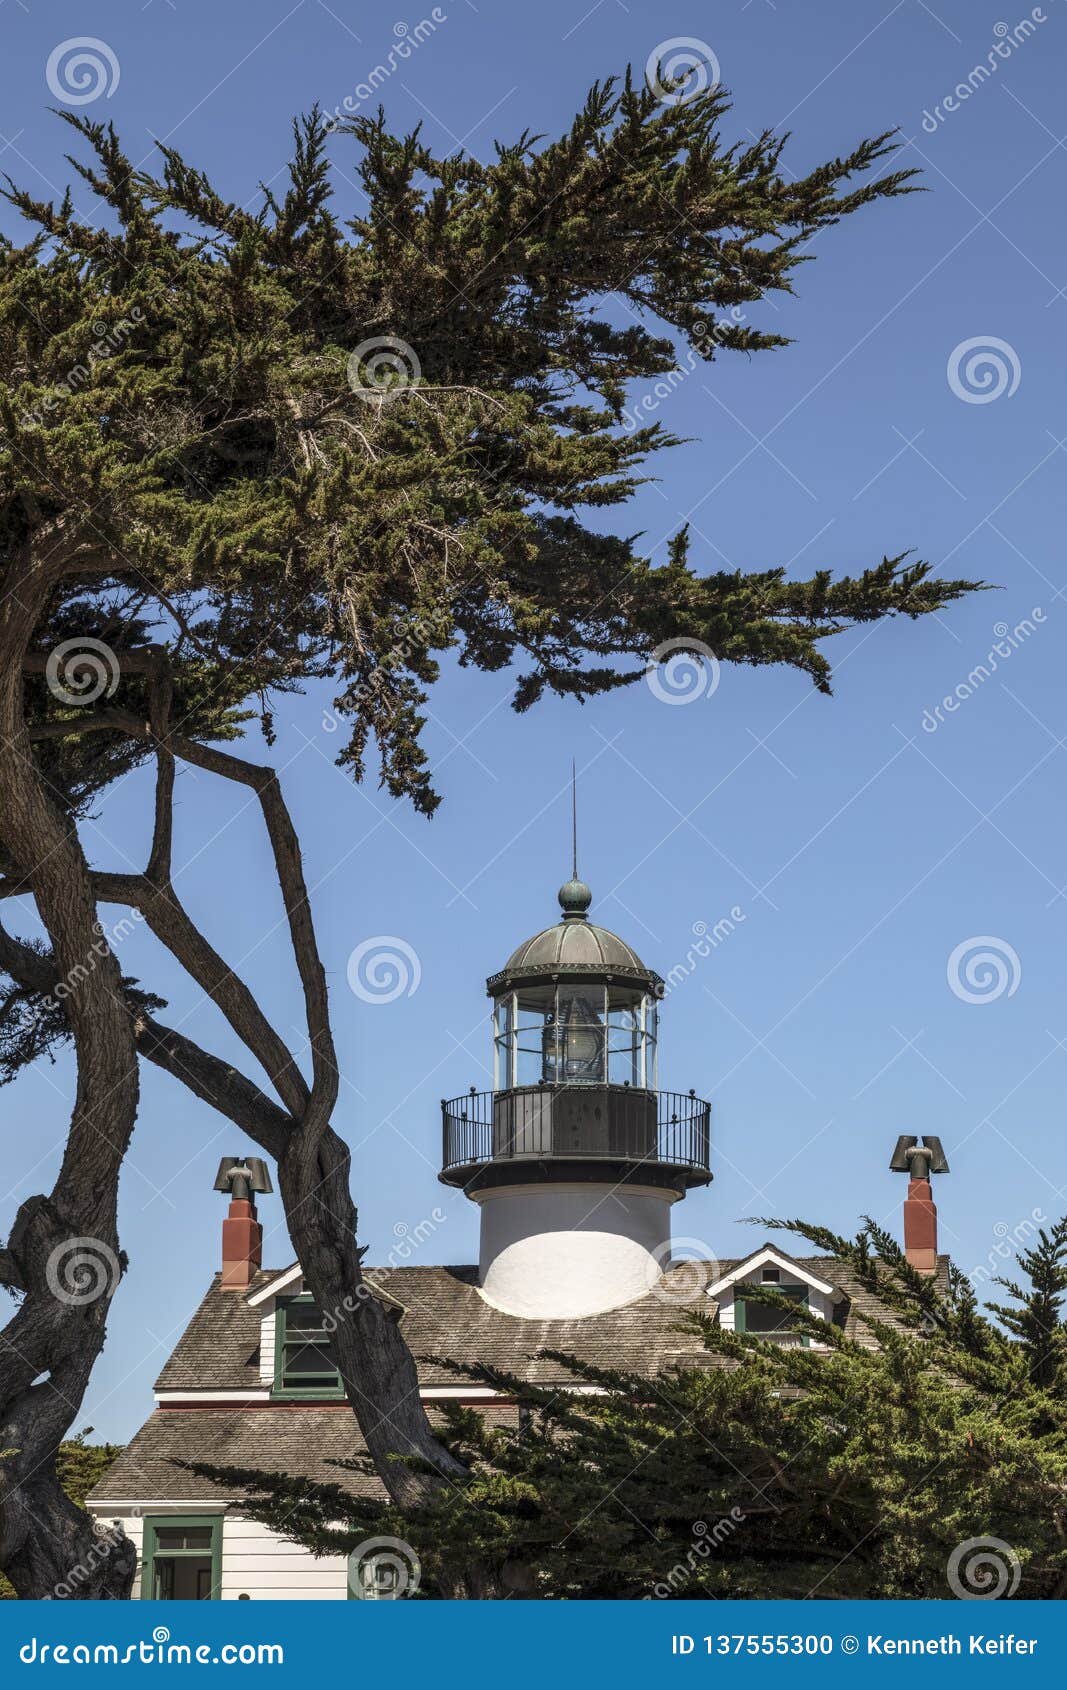 point pinos lighthouse and monterey cypress - california